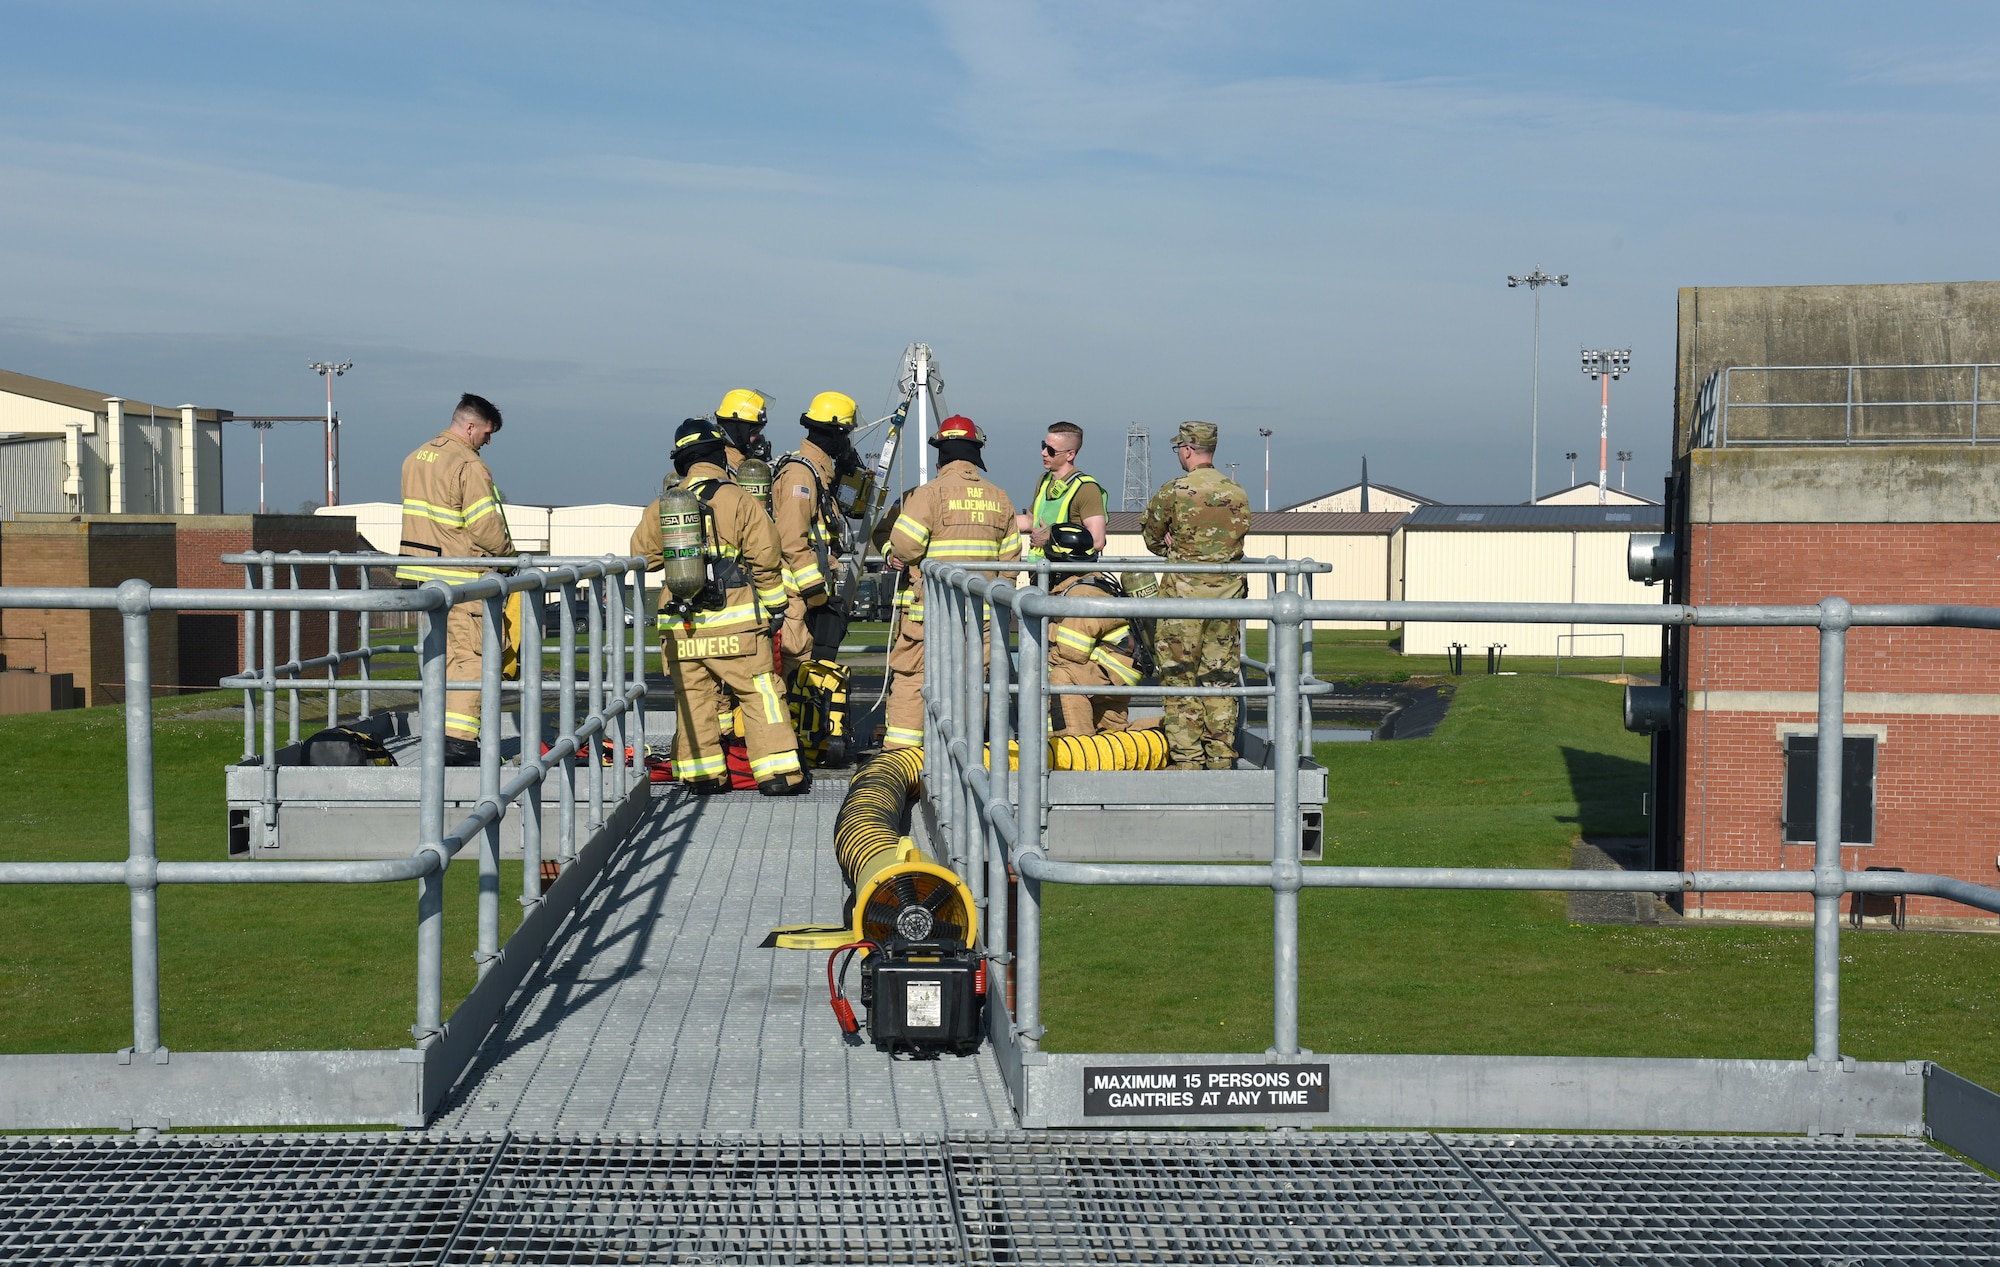 U.S. Air Force and British civilian firefighters, assigned to the 100th Civil Engineer Squadron Fire Department, carry out confined space training at the purpose-built facility on Royal Air Force Mildenhall, England, April 14, 2022. The fire department conducts a full confined-space drill at least four times a year for firefighters to meet training requirements. It’s vital for them to stay proficient with confined space and rescue to ensure they can successfully respond to real-world emergencies. (U.S. Air Force photo by Karen Abeyasekere)